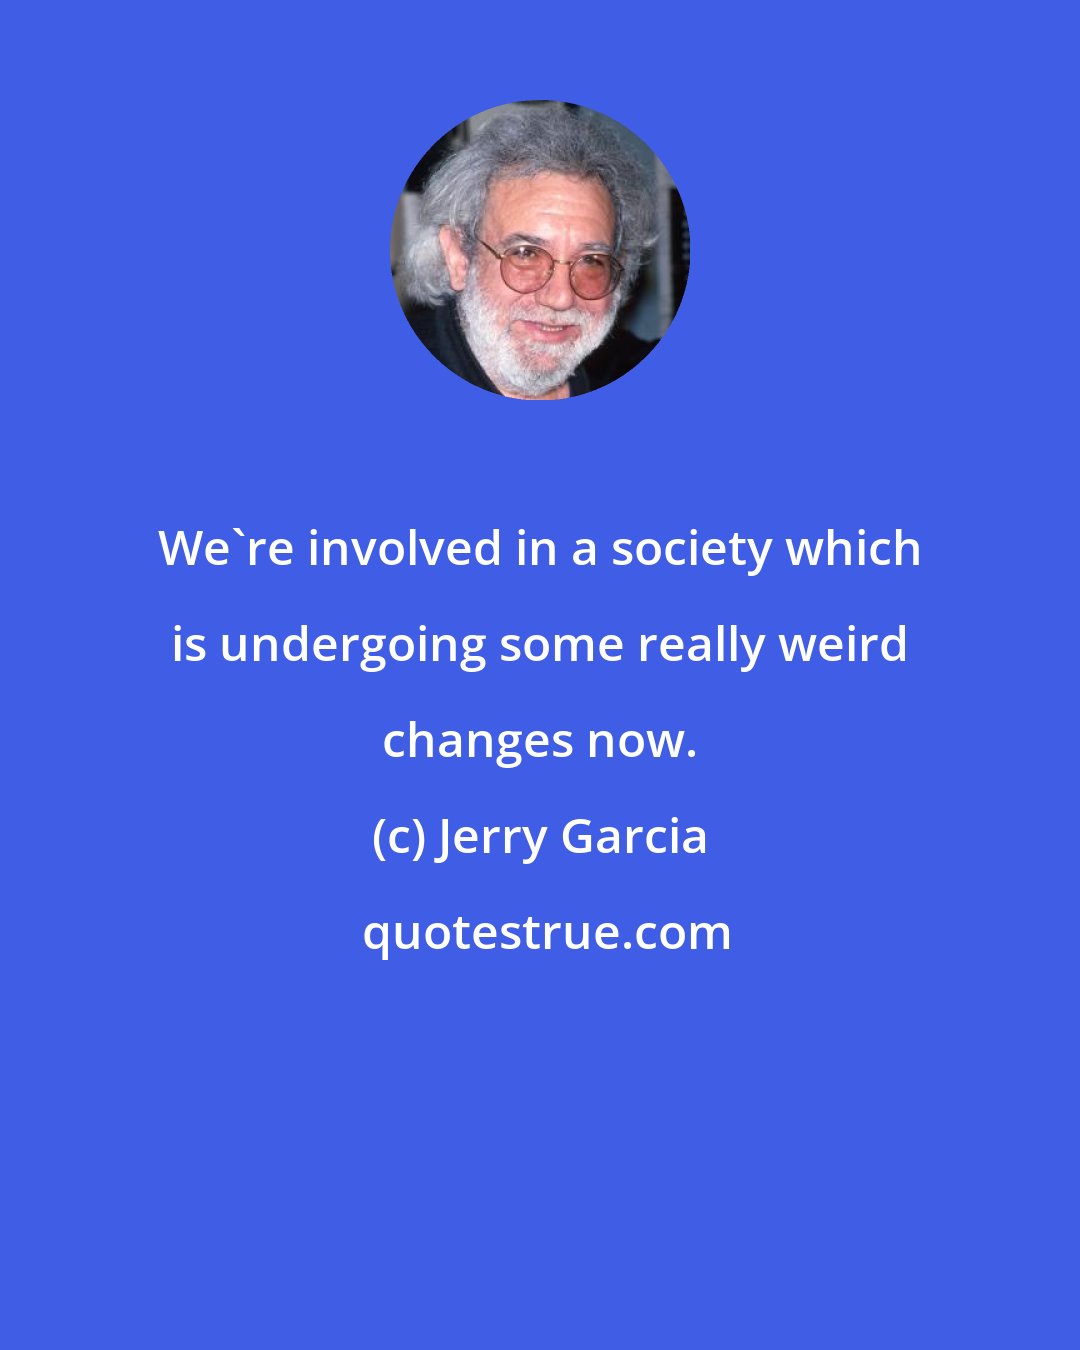 Jerry Garcia: We're involved in a society which is undergoing some really weird changes now.